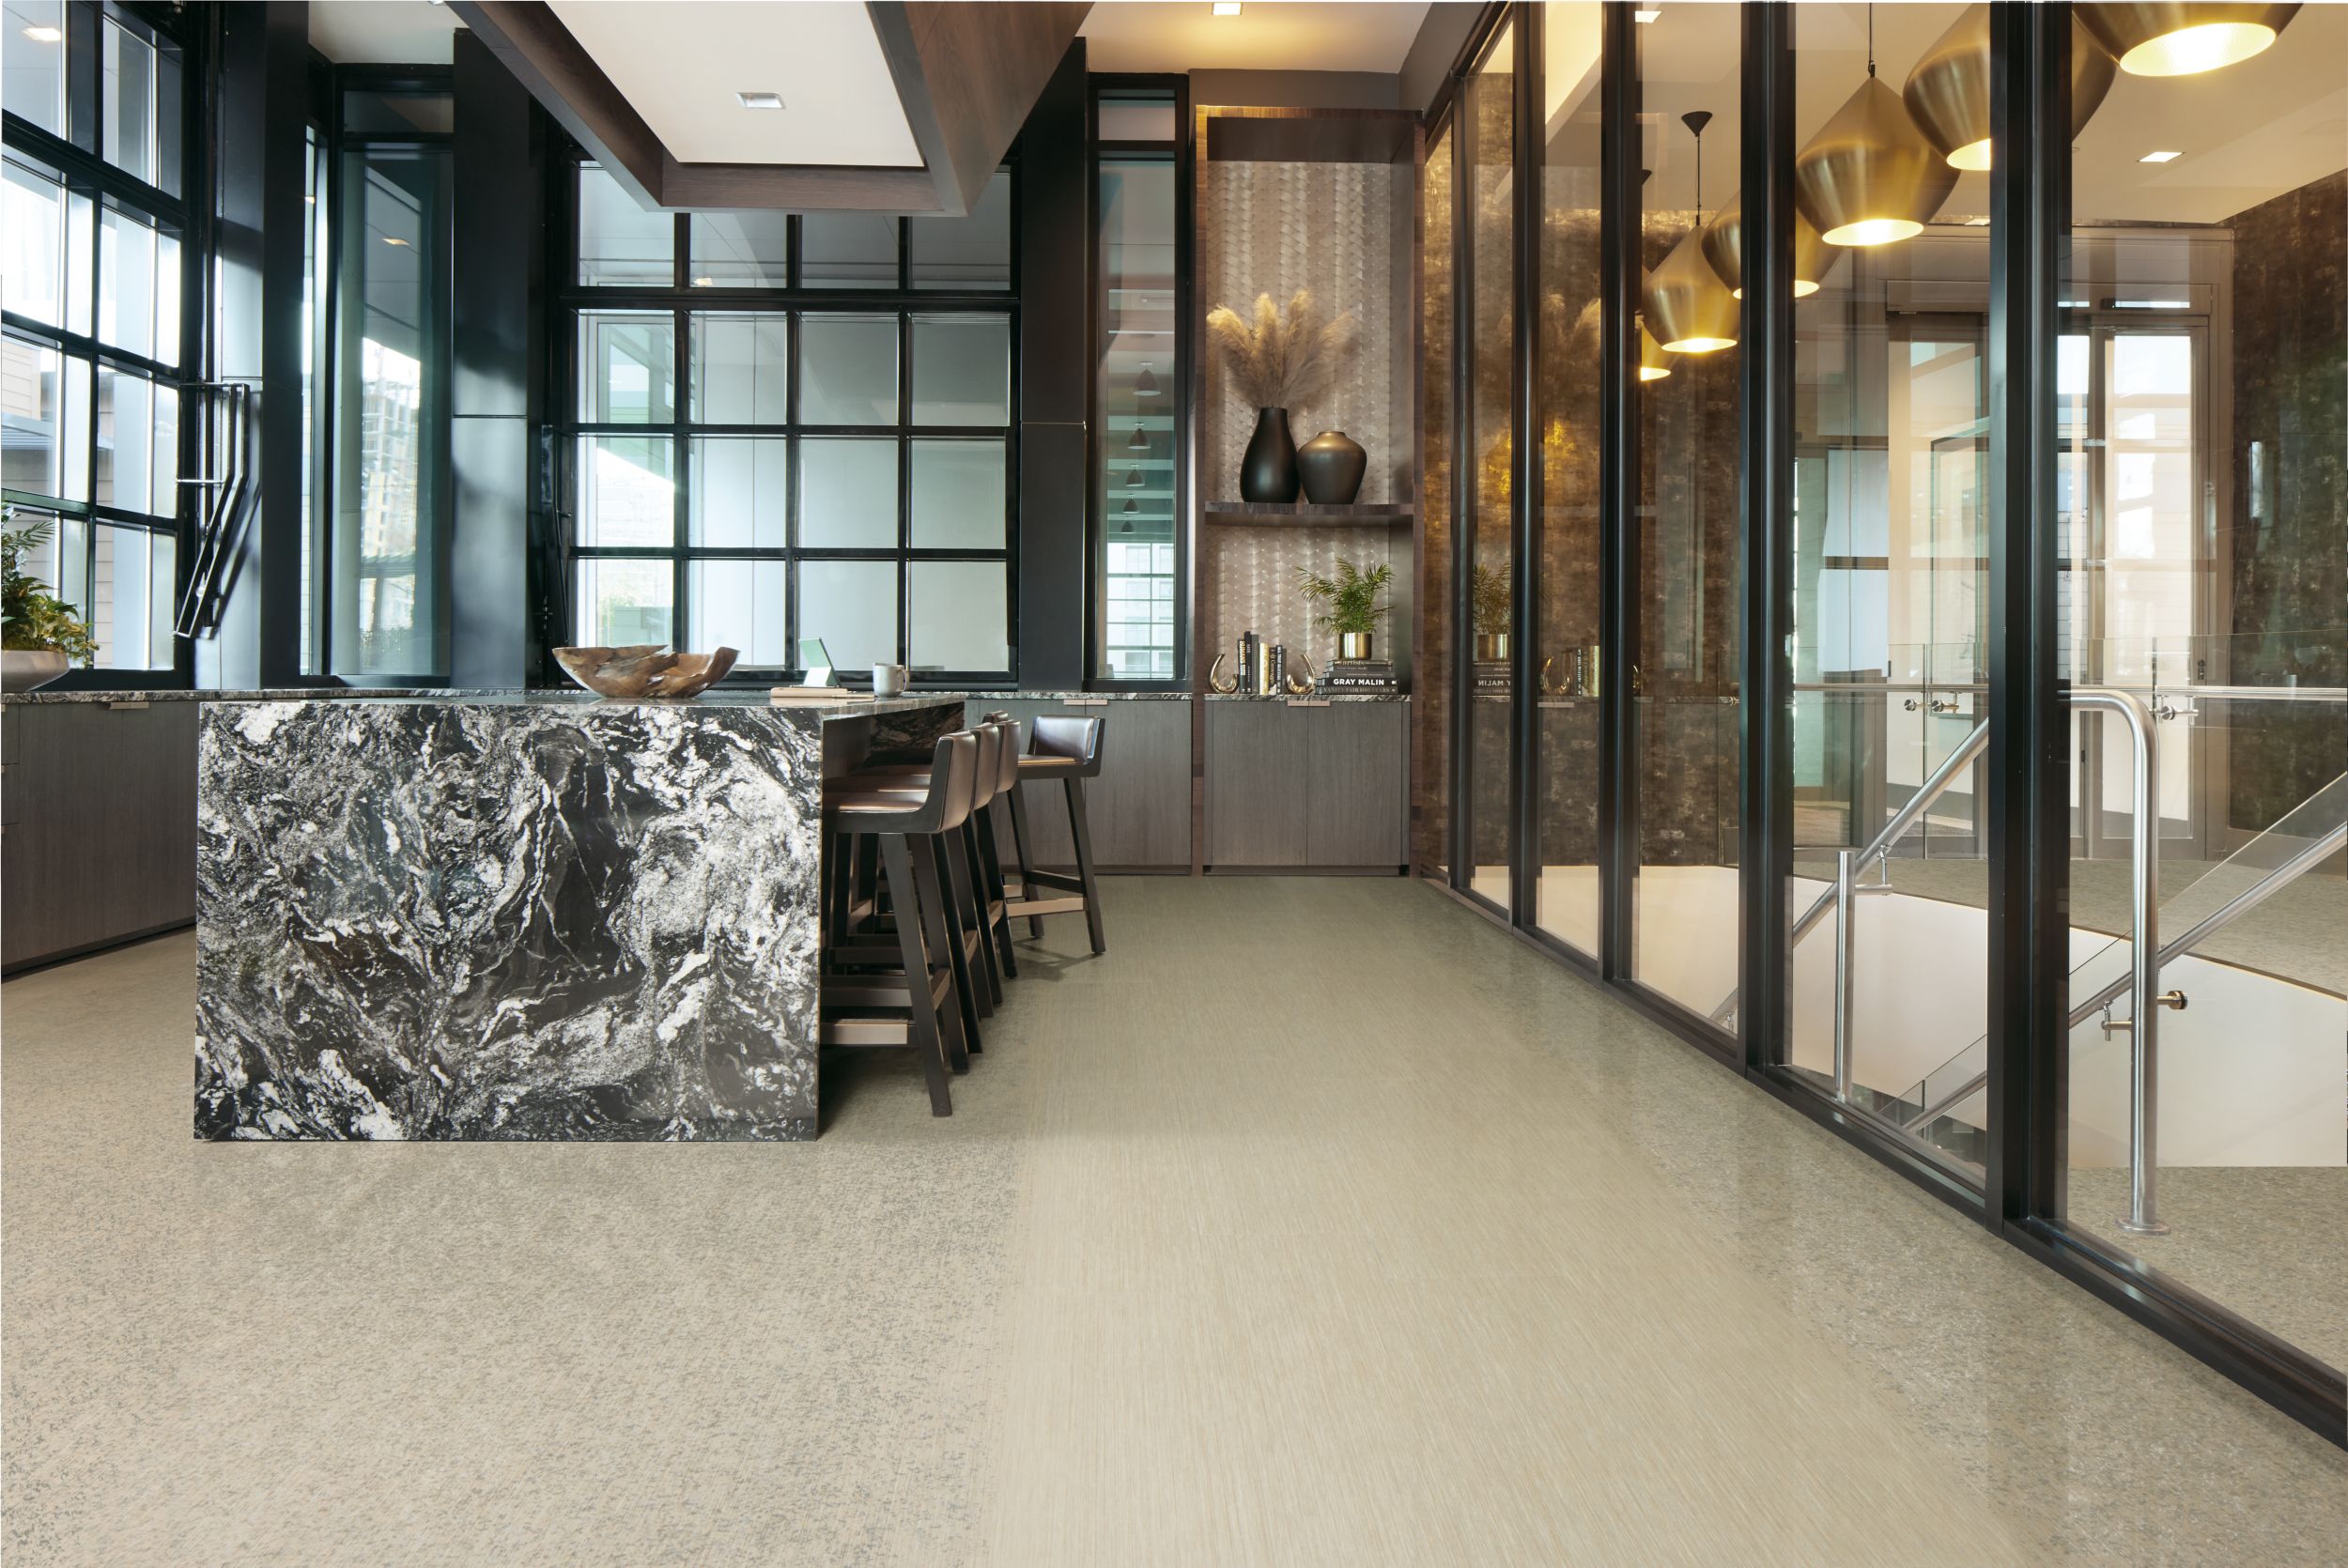 Interface Dither Silk LVT with Silk Age LVT and Shantung LVT in  a dining area imagen número 3